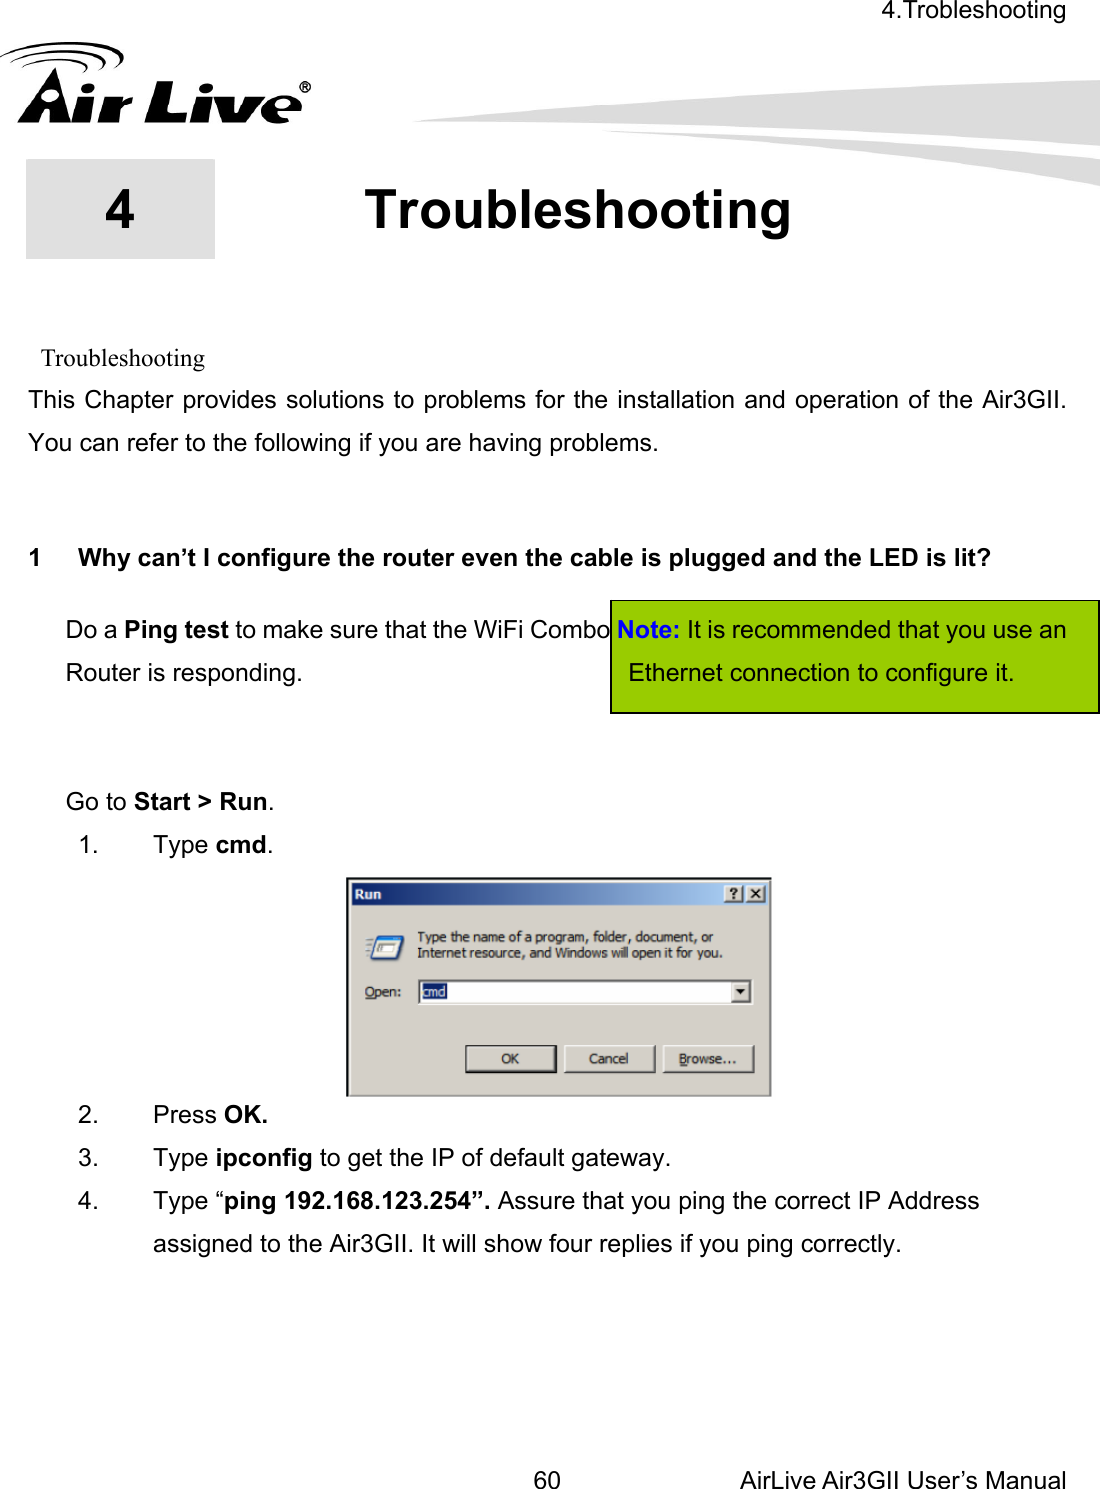 4.Trobleshooting  AirLive Air3GII User’s Manual 60    Troubleshooting 3GII. ou can refer to the following if you are having problems.  1  Why can’t I configure the router even the cable is plugged and the LED is lit?   Do a Ping test to make sure that the WiFi Combo Note: It is recommended that you use an Router is responding.                          Ethernet connection to configure it.                                  1. Type cmd.  4  4.Troubleshooting This Chapter provides solutions to problems for the installation and operation of the AirY   Go to Start &gt; Run.   2. Press OK. orrect IP Address assigned to the Air3GII. It will show four replies if you ping correctly.     3. Type ipconfig to get the IP of default gateway. 4. Type “ping 192.168.123.254”. Assure that you ping the c